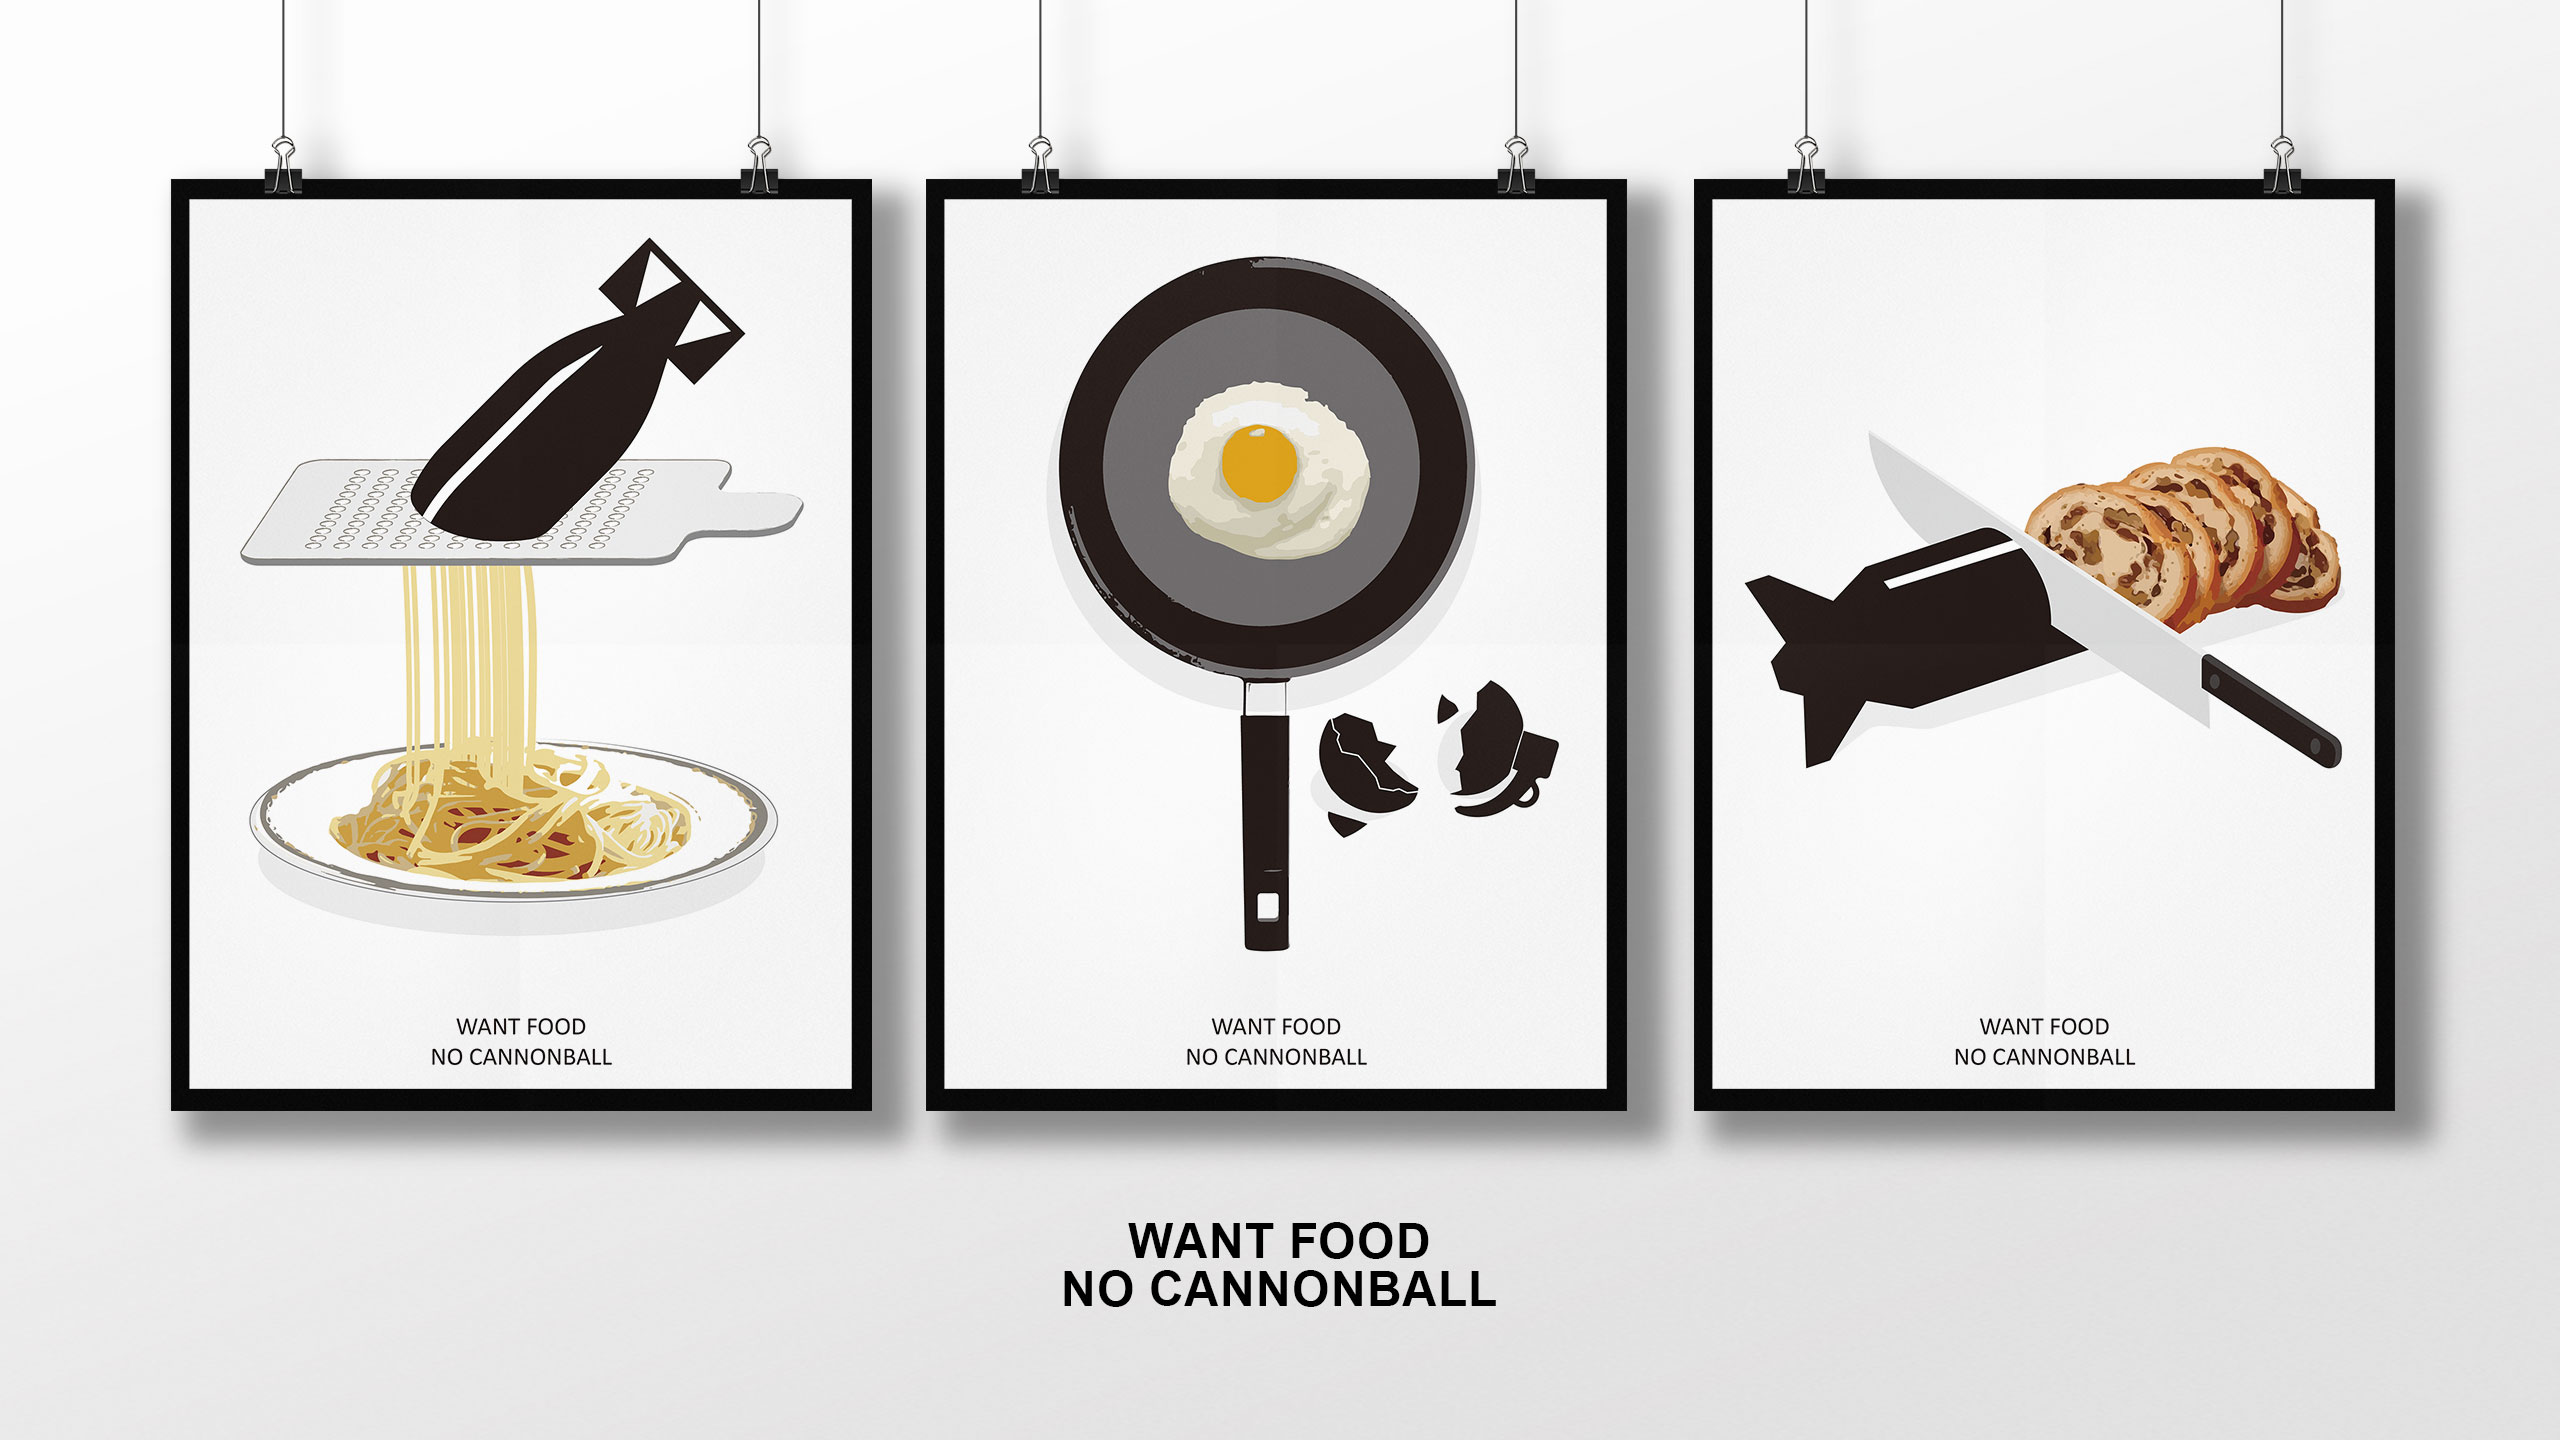 Want food,no cannonball